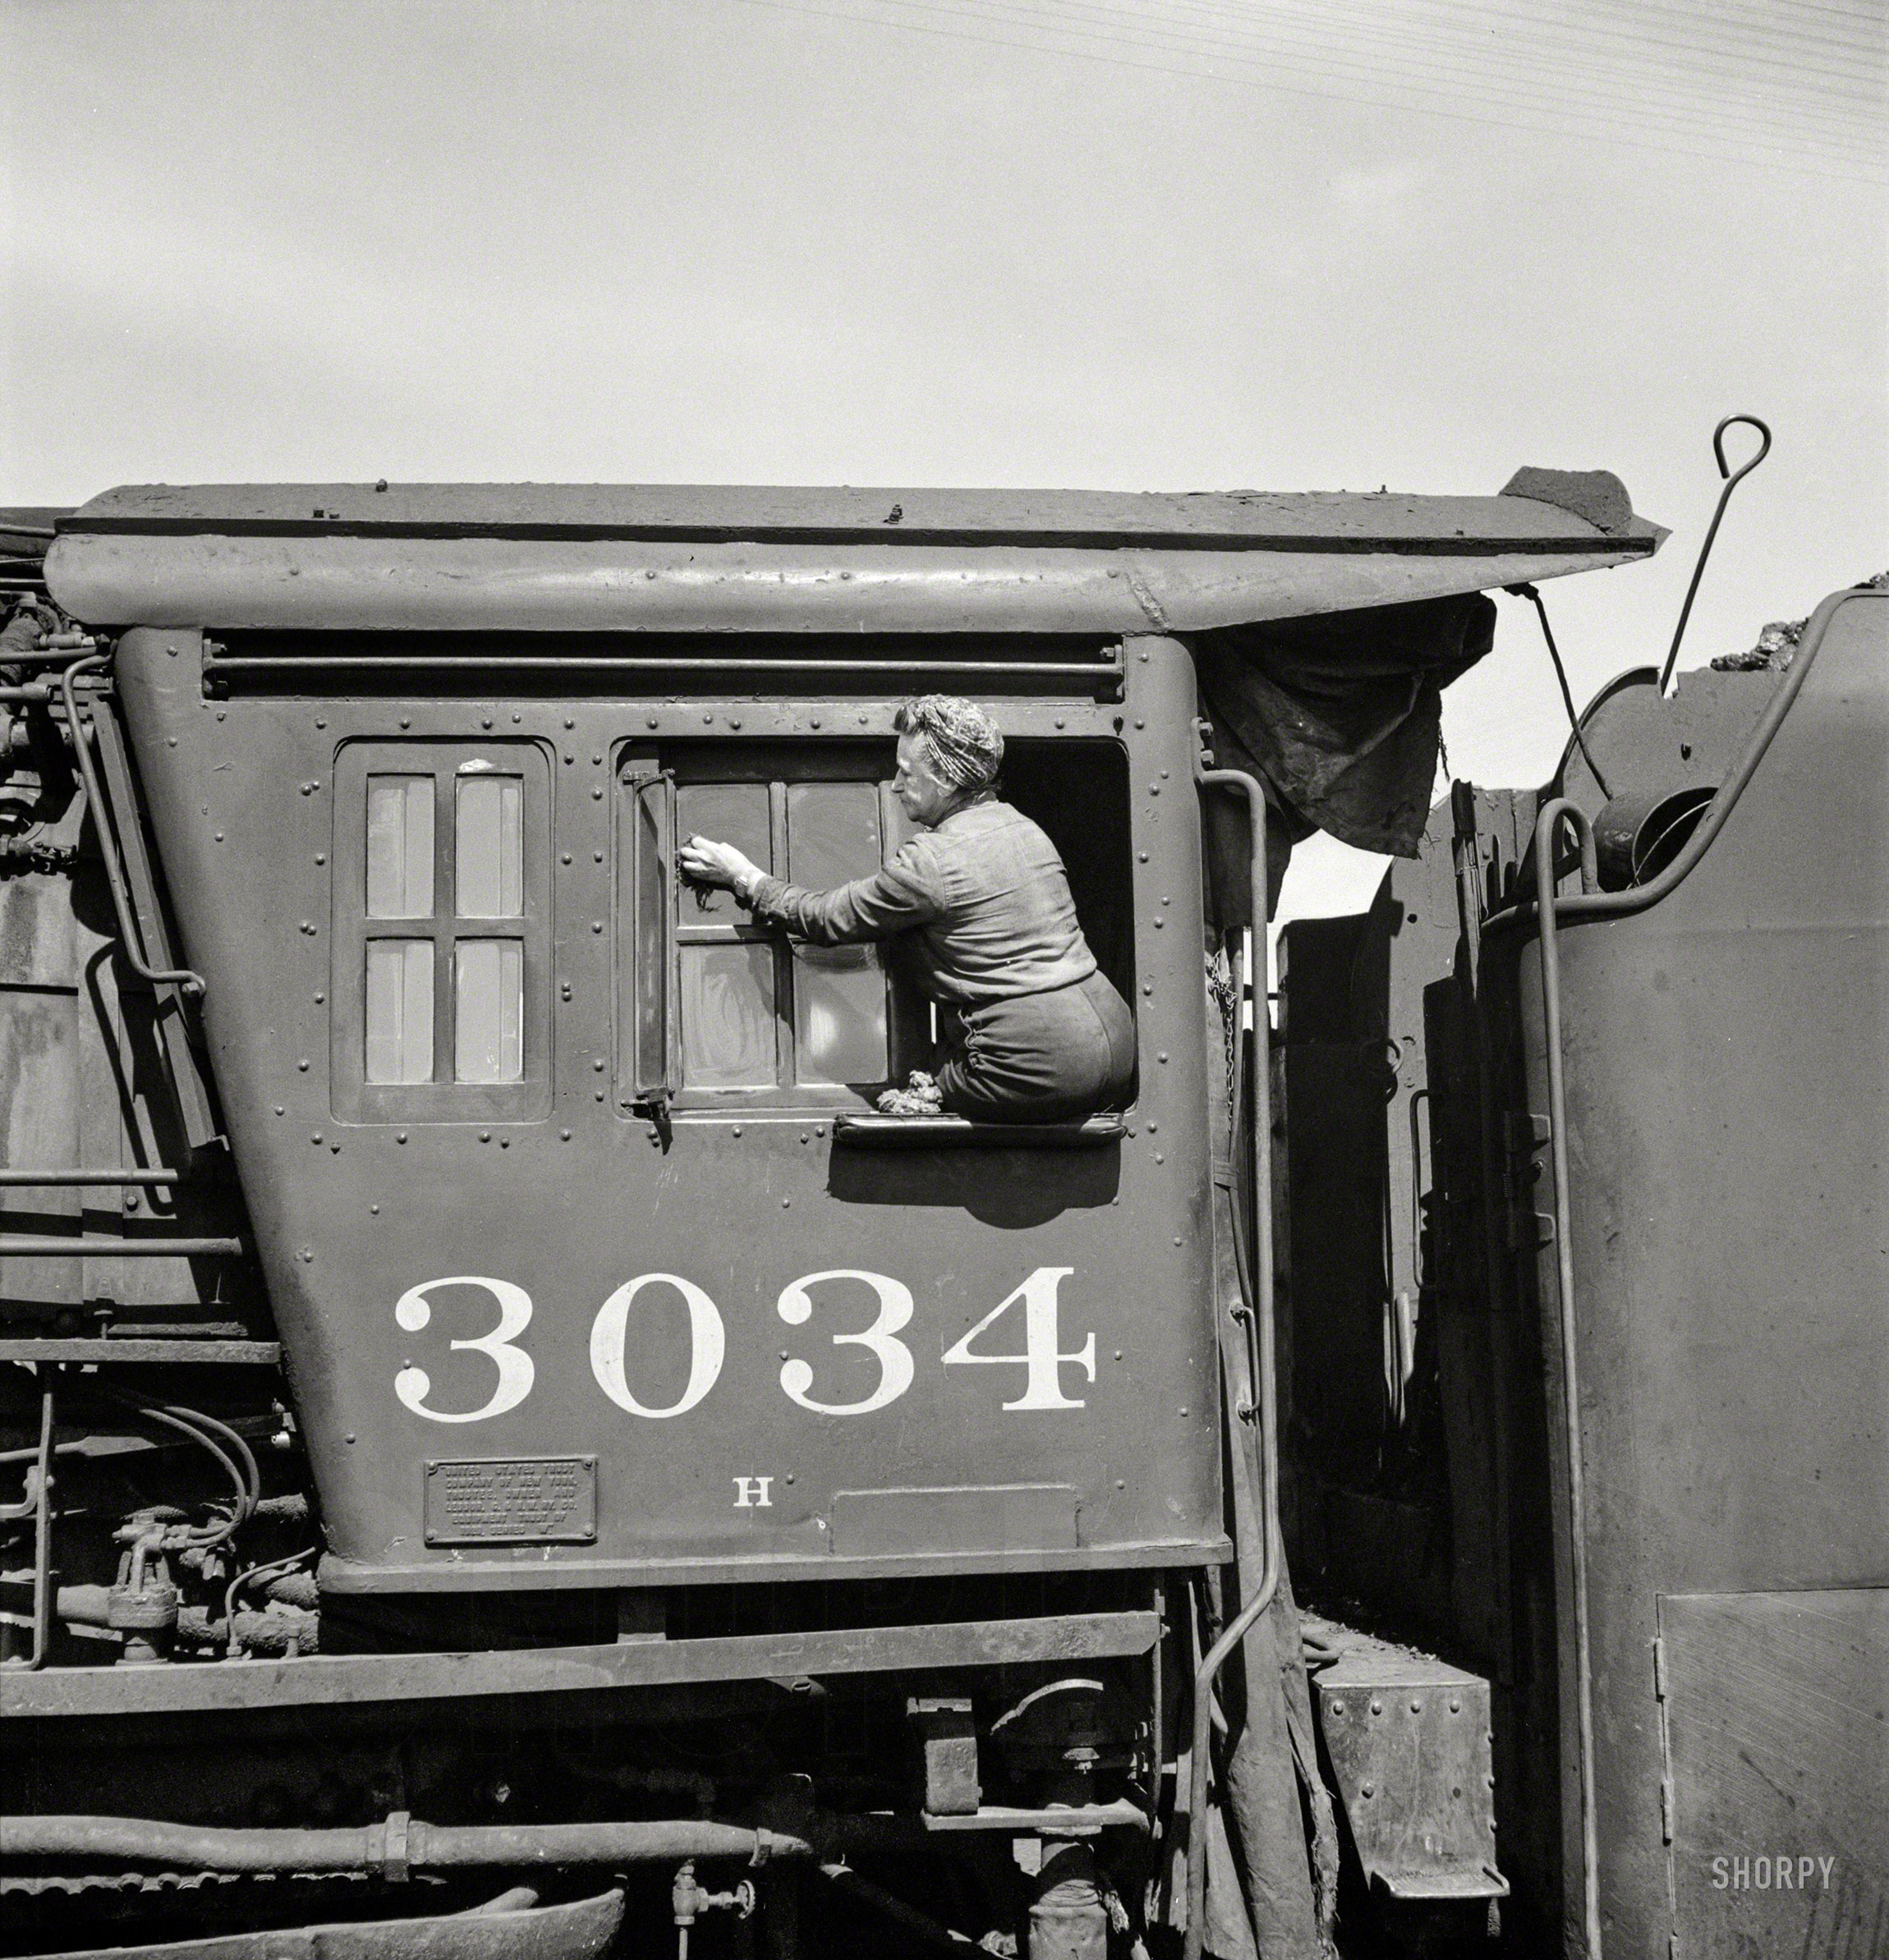 May 1943. "Clinton, Iowa. Women wipers of the Chicago & North Western cleaning one of the giant freight locomotives." Medium-format negative by Jack Delano for the Office of War Information. View full size.